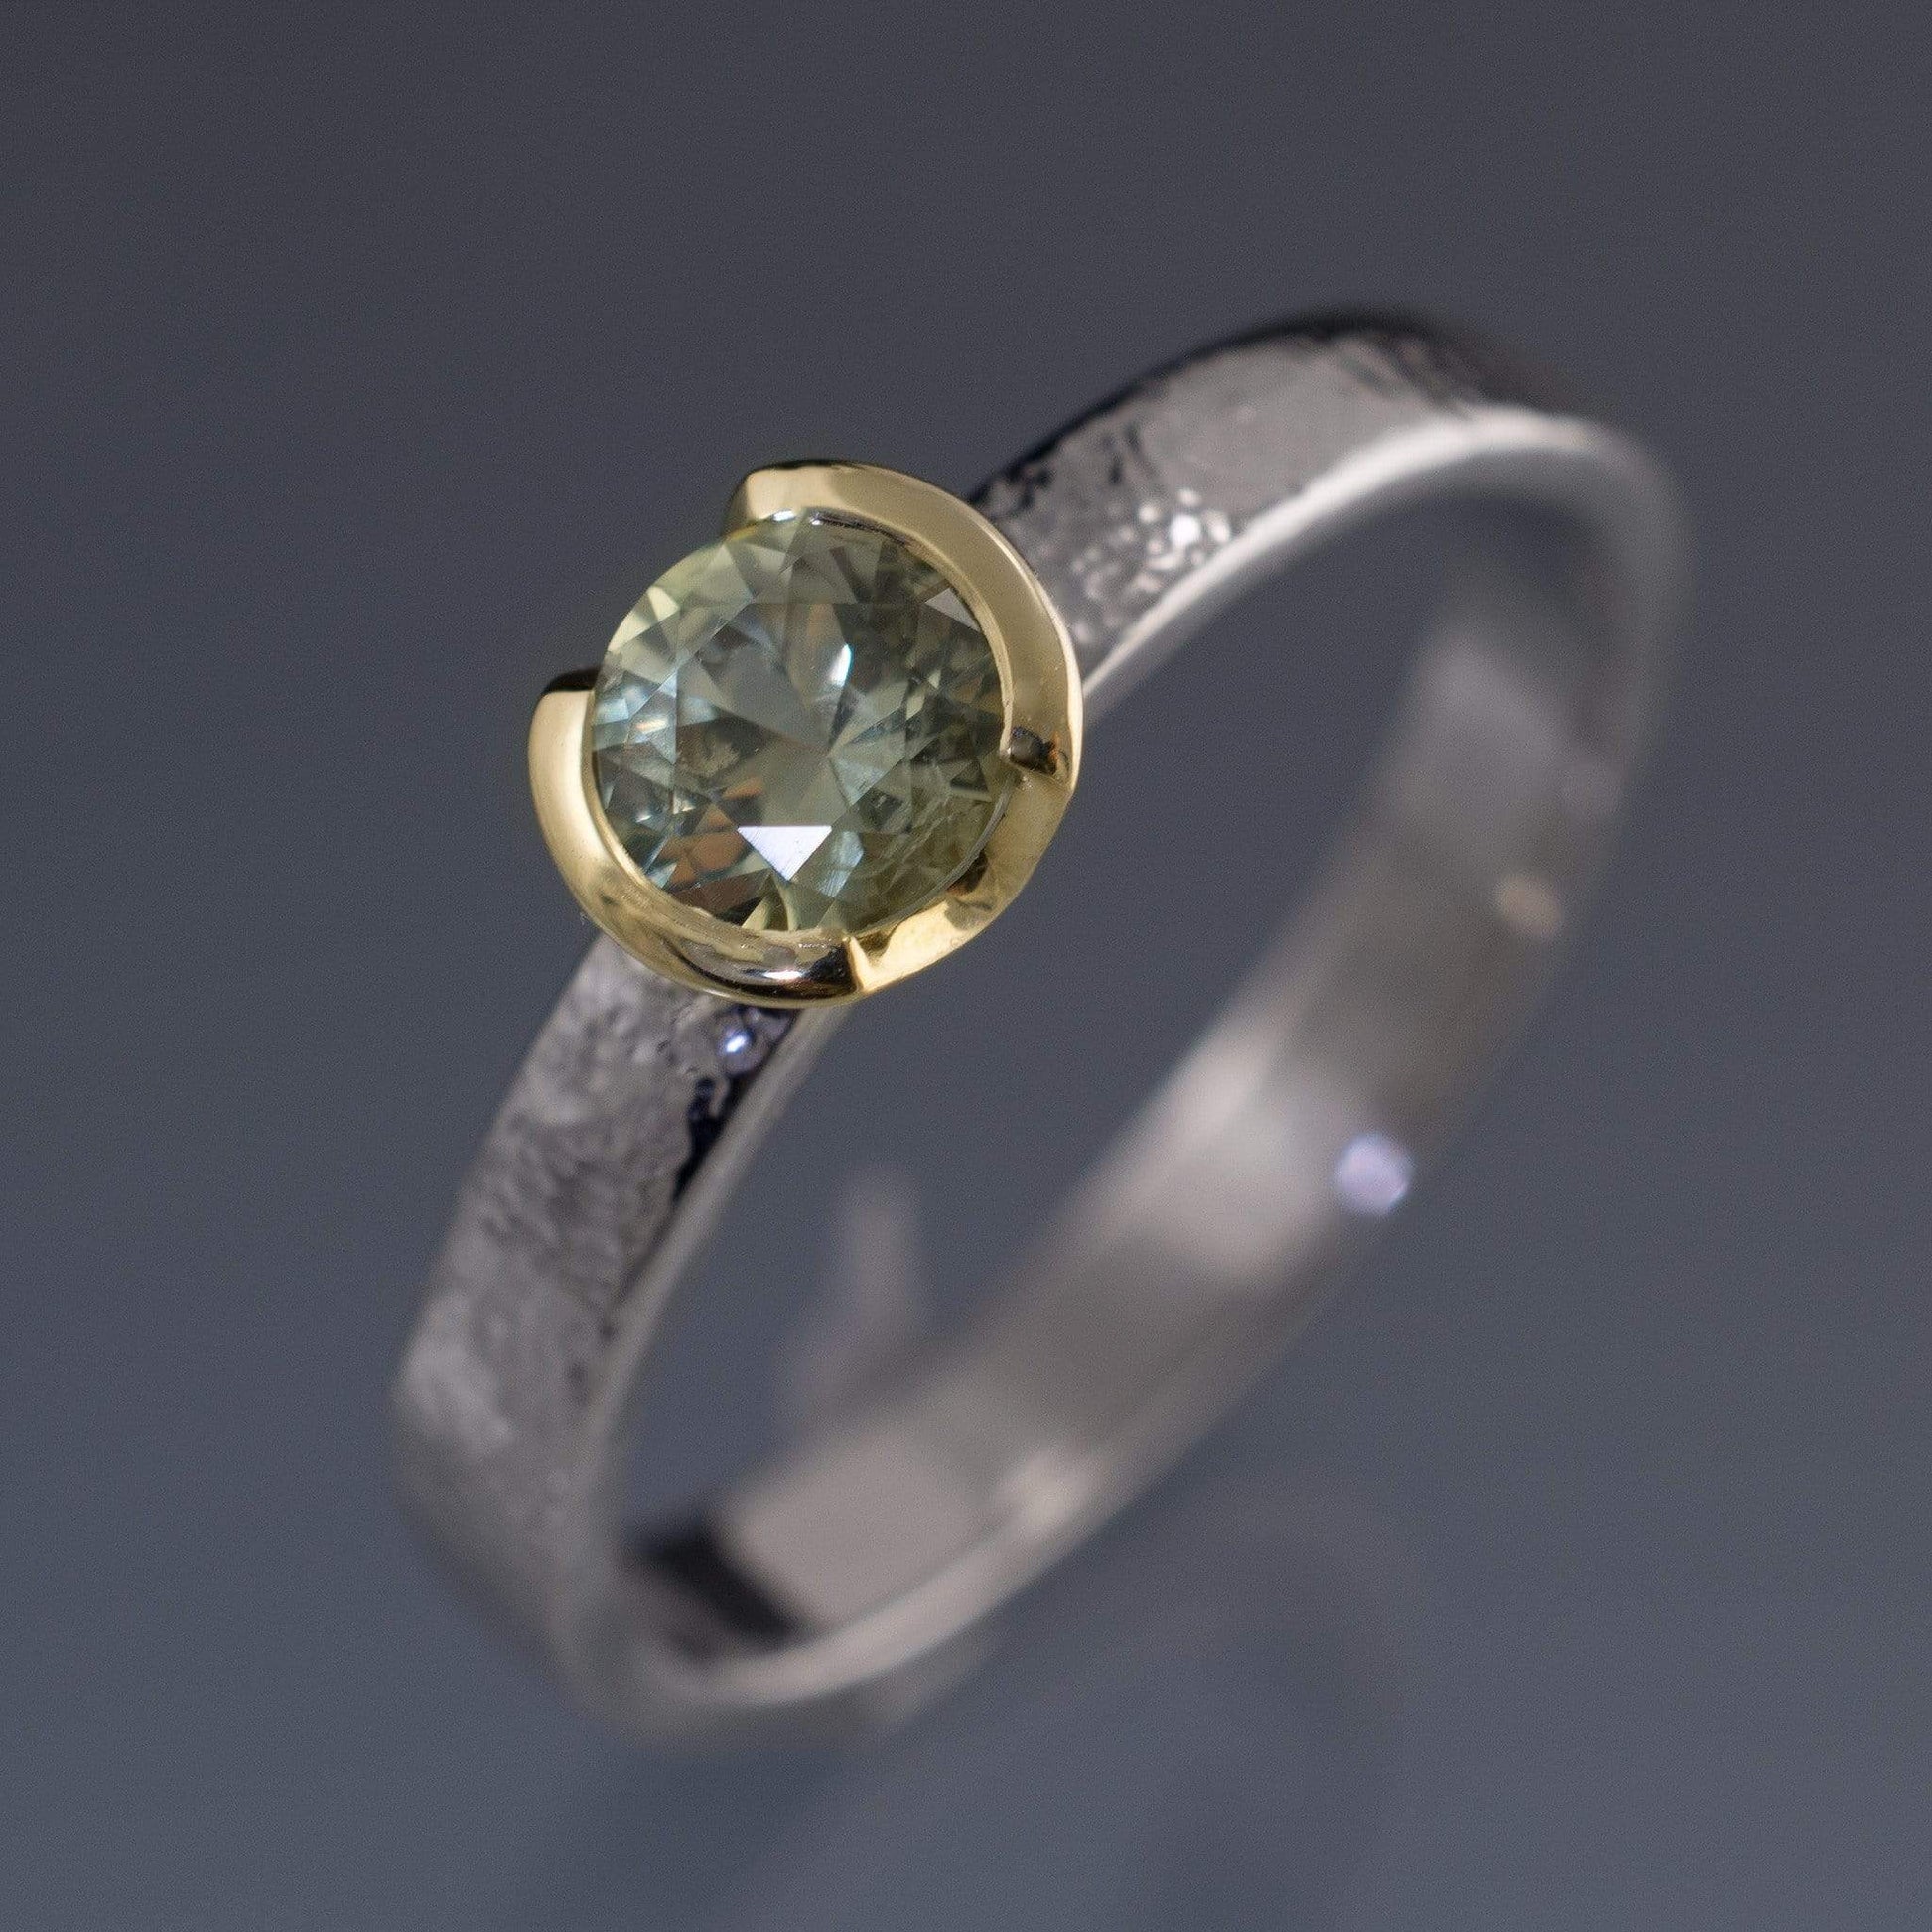 Pale Cream to Pastel Blue Fair Trade Montana Sapphire Gold Semi-Bezel Solitaire Engagement Ring Ring by Nodeform